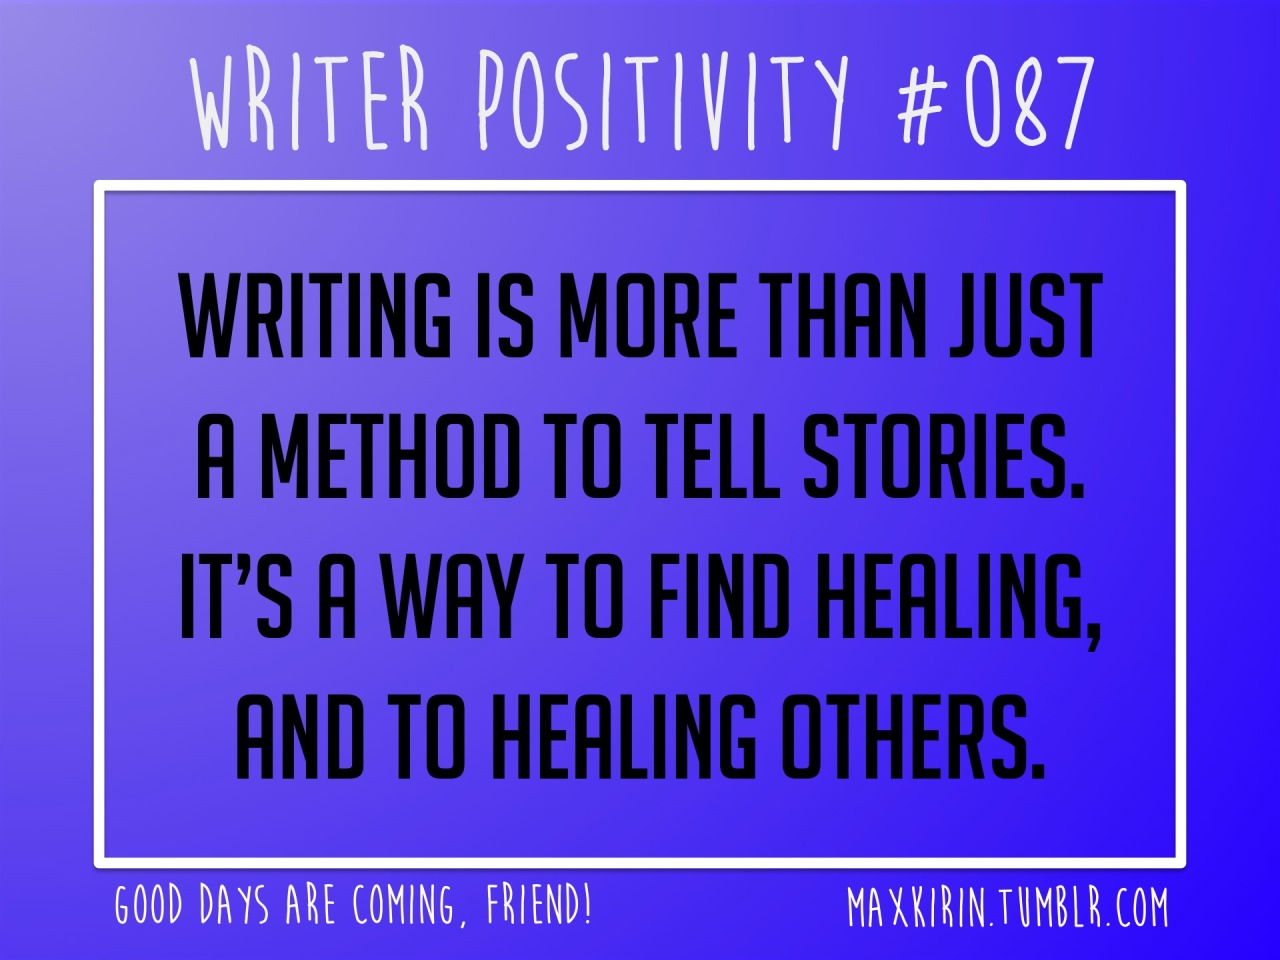 maxkirin:  + DAILY WRITER POSITIVITY +  #087 Writing is more than just a method to